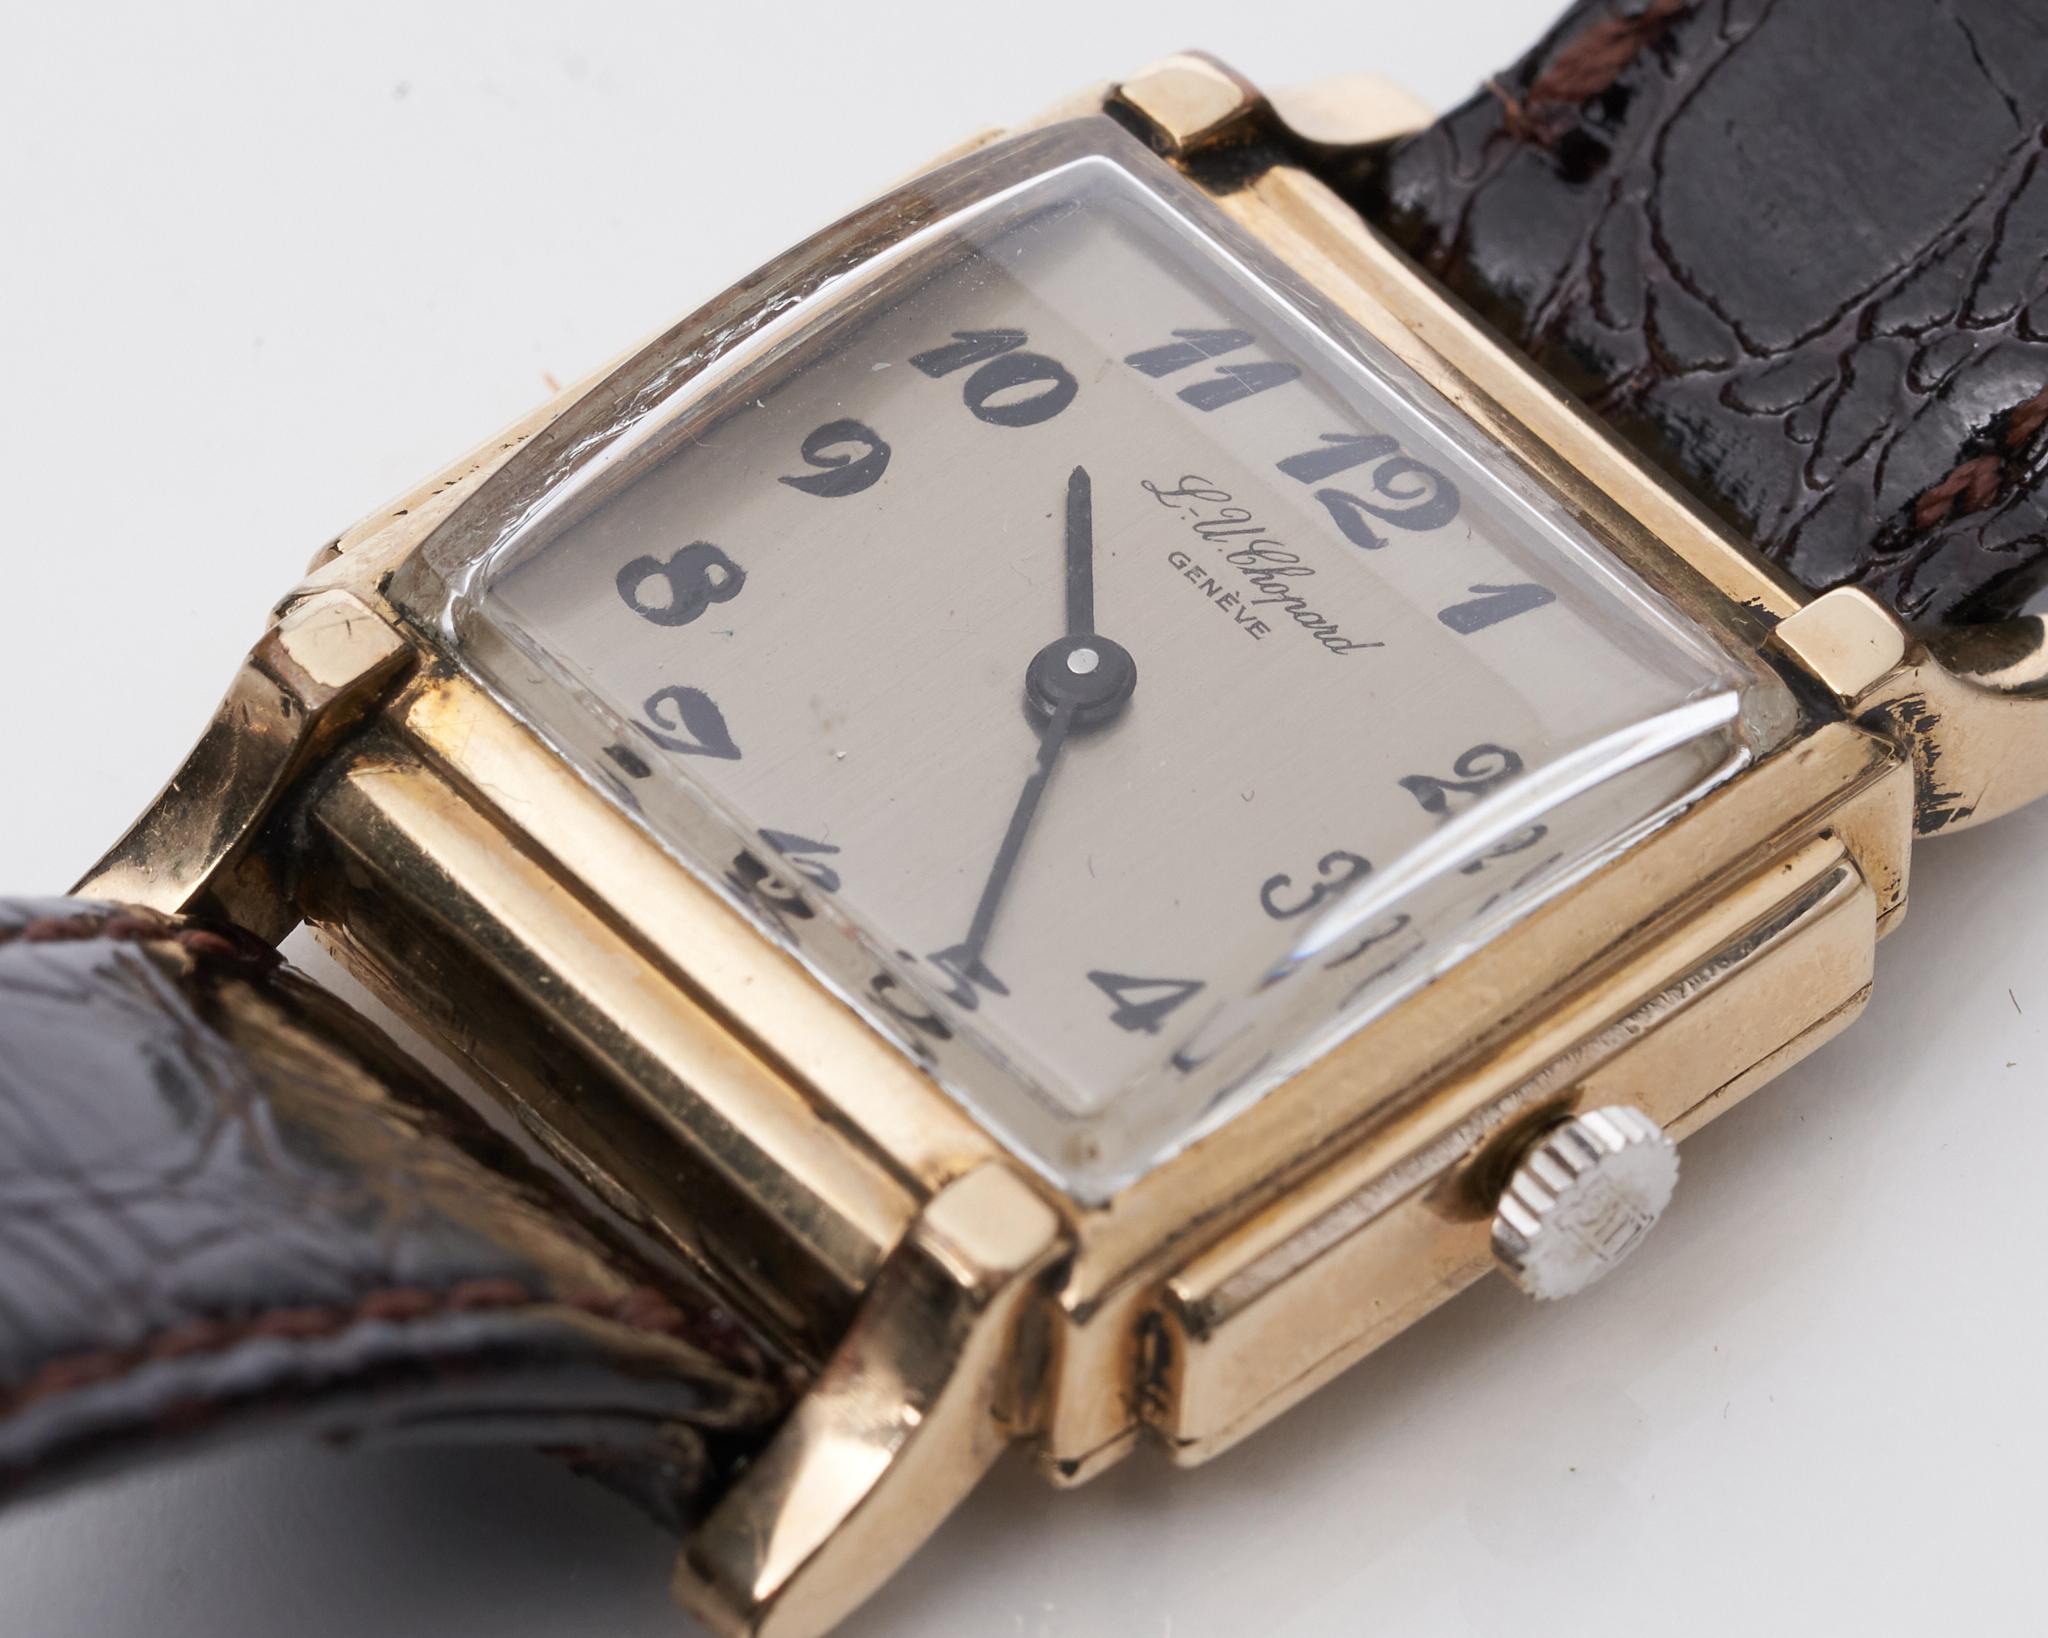 Chopard Geneve 14k manual wind Swiss made watch. Almost identical to Cartier Tank. This watch comes with a genuine alligator band. L.U.C watches epitomize the highest standard of Swiss watchmaking. All the steps involved in crafting L.U.C watches